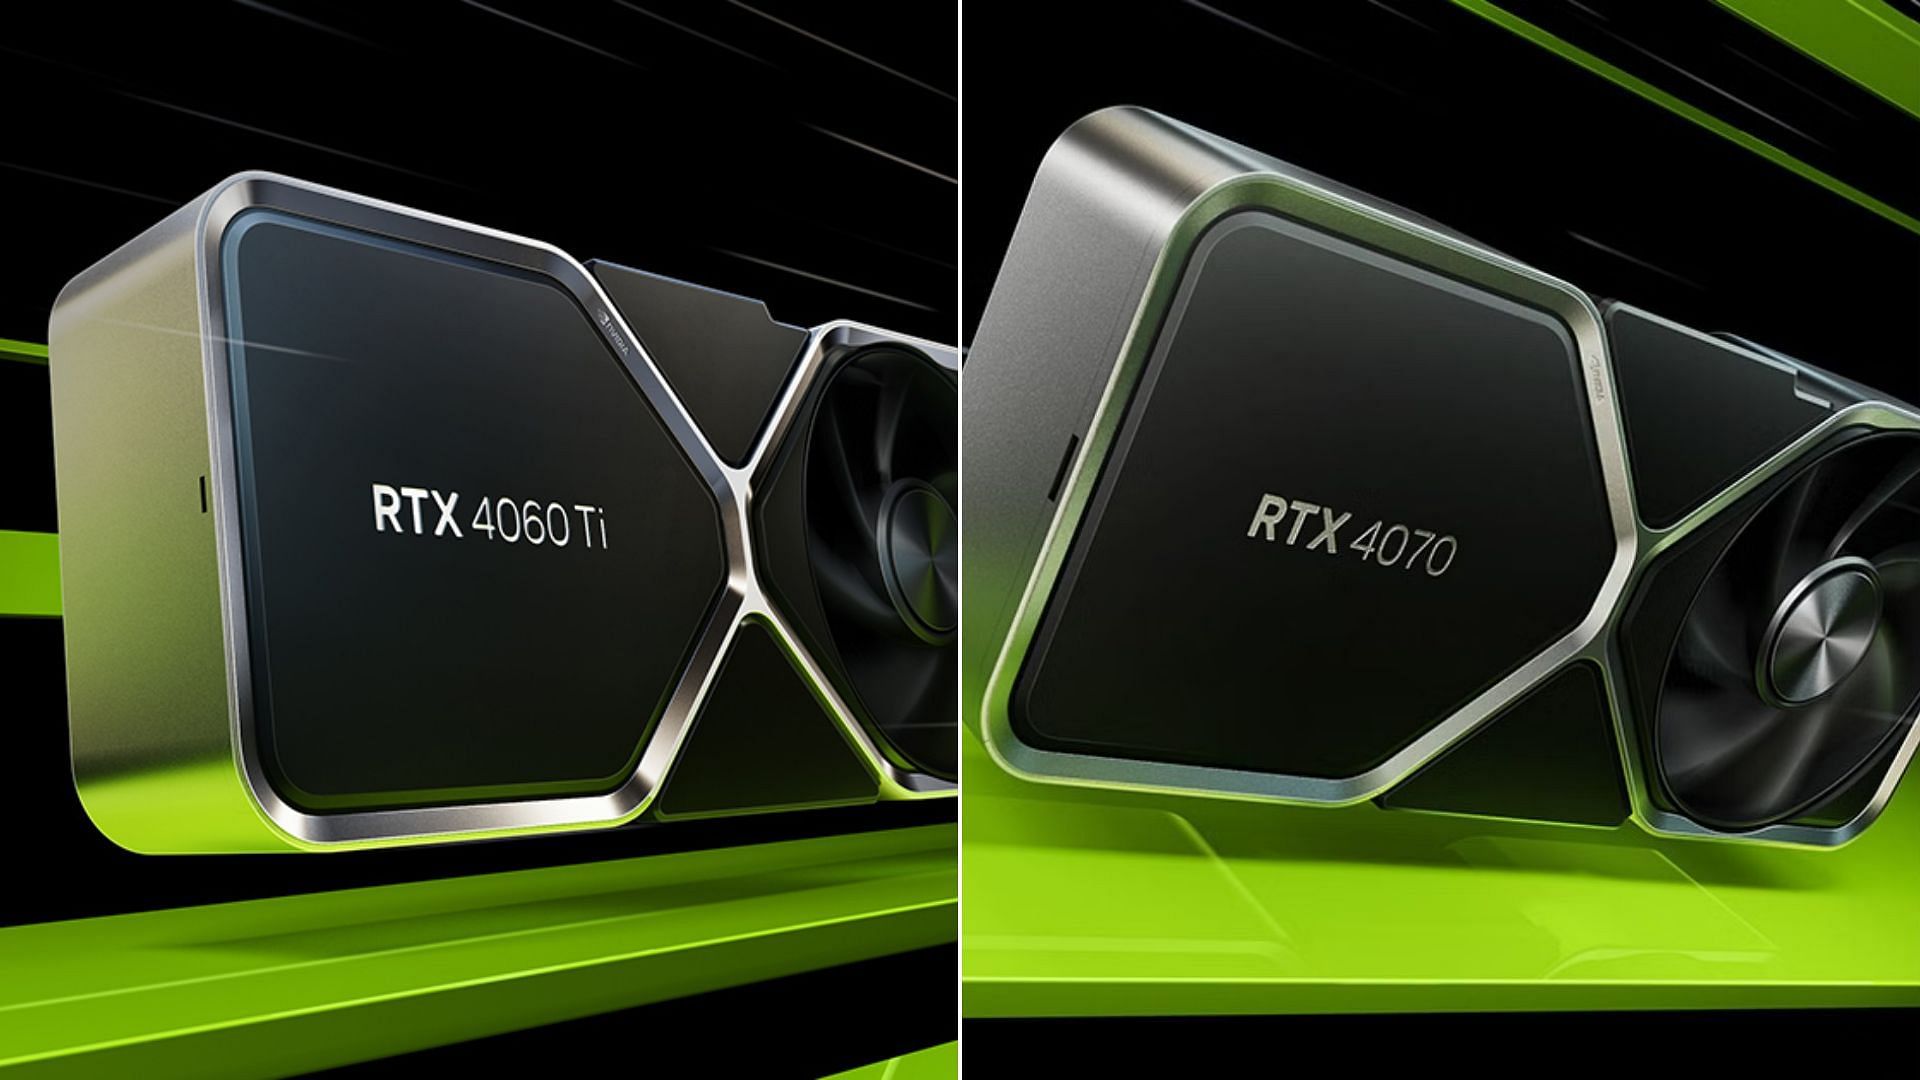 Nvidia RTX 4060 Ti 16 GB vs RTX 4070 12 GB: How big is the difference?